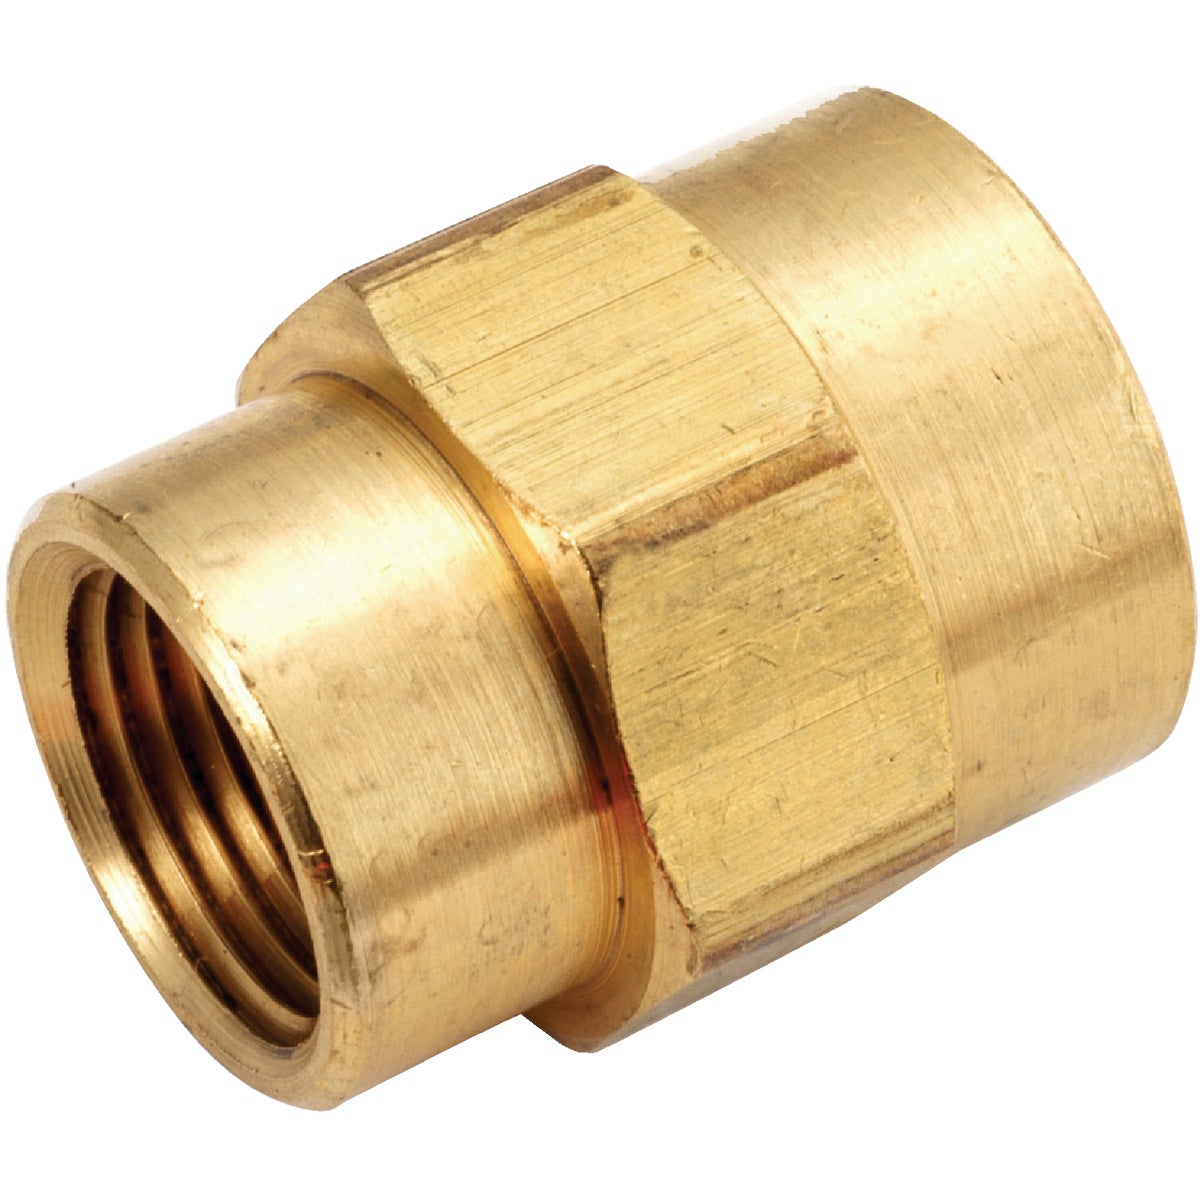 Anderson Metals 1/2 In. x 1/4 In. Yellow Brass Reducing Coupling